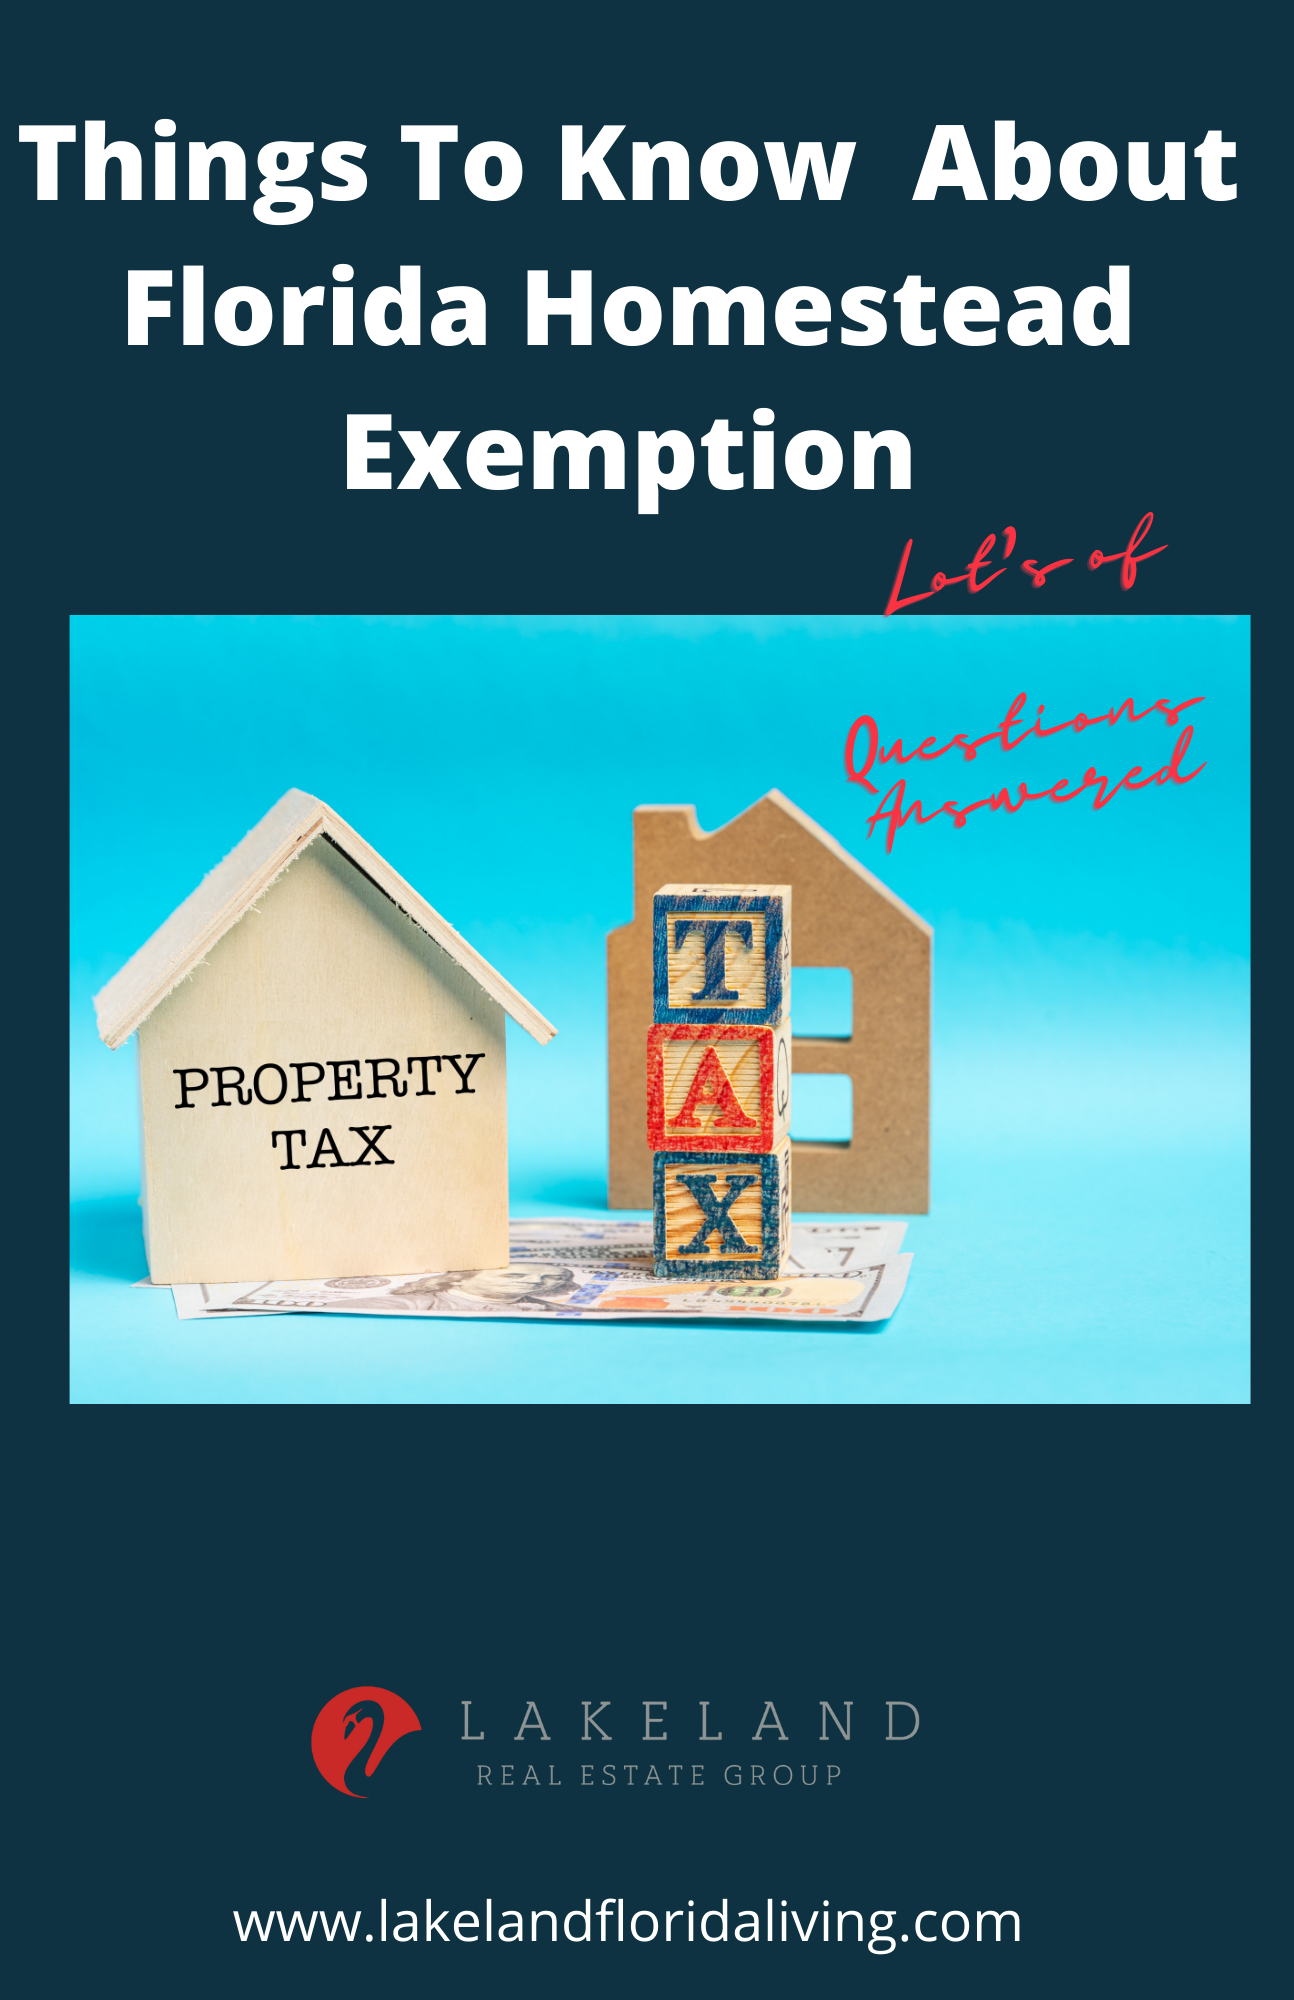 must-know-facts-about-florida-homestead-exemptions-lakeland-real-estate